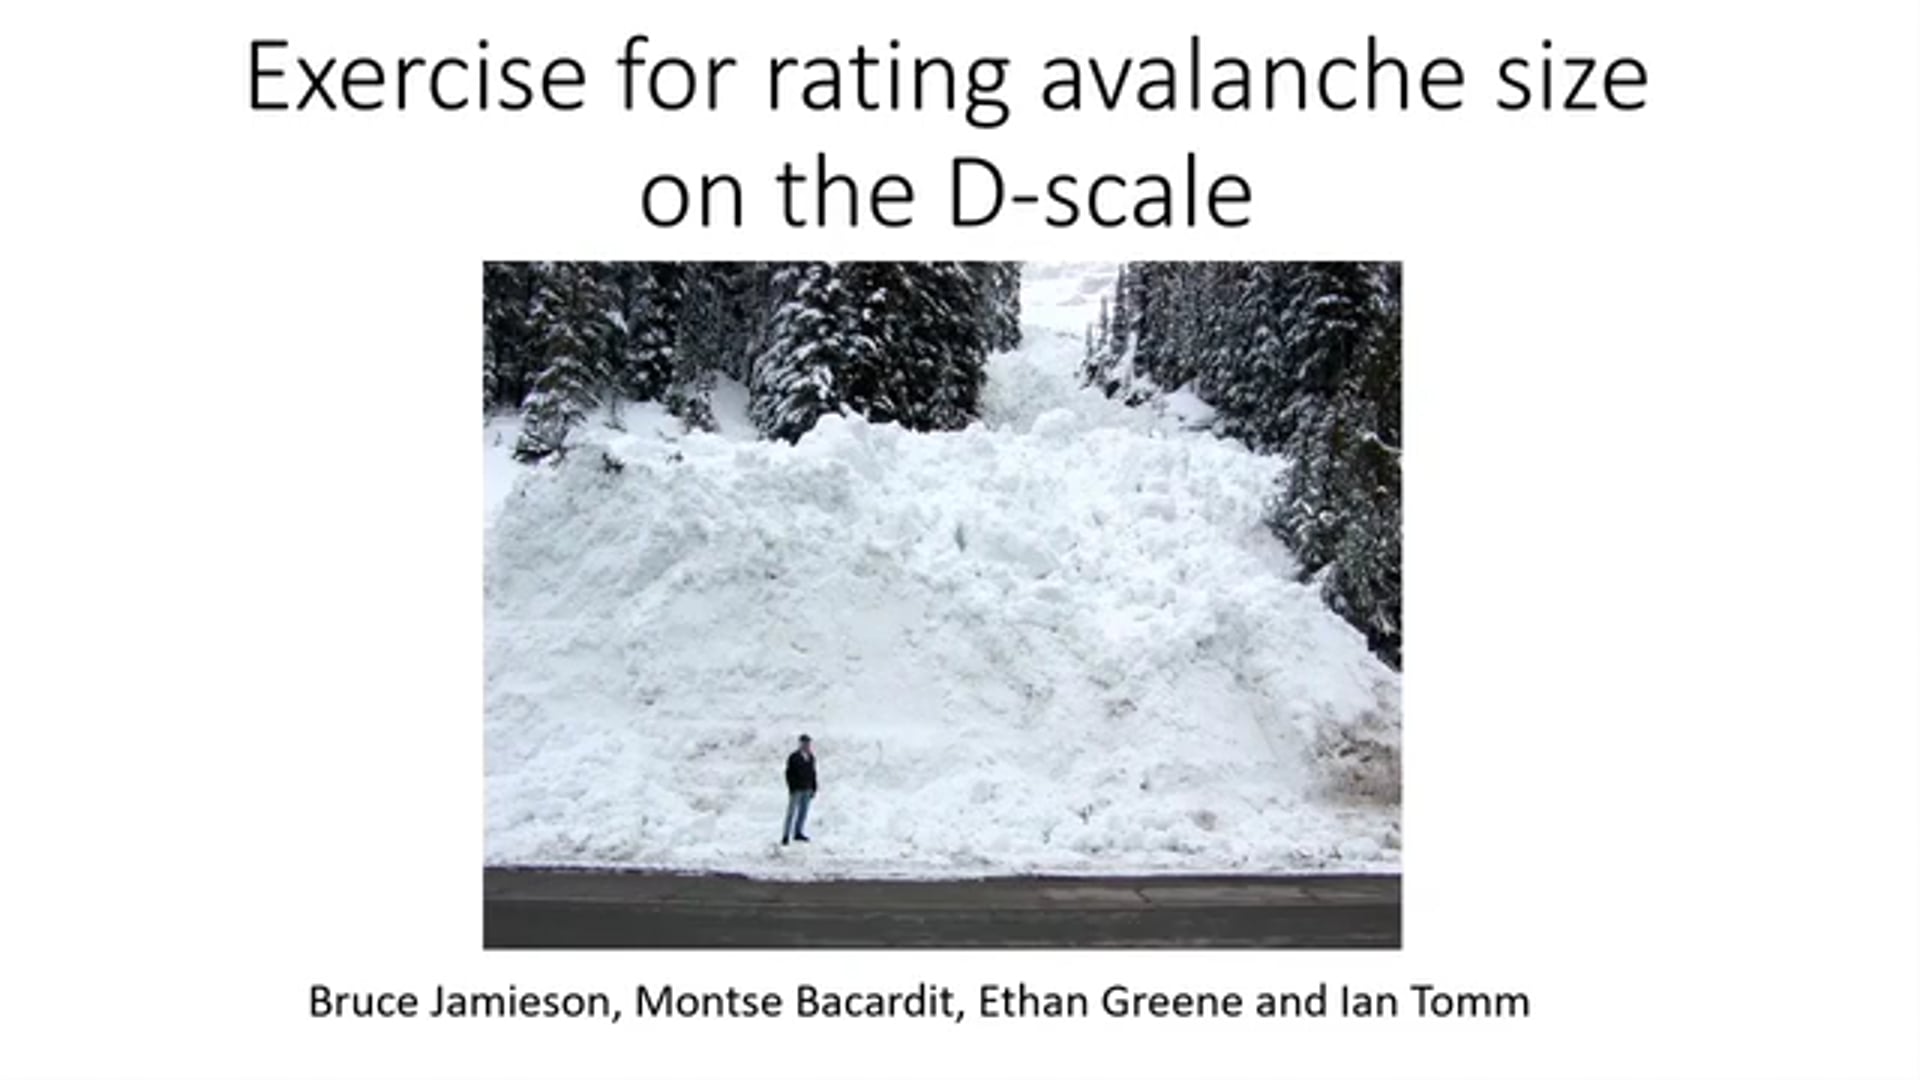 Exercise for rating avalanche size on the D-scale